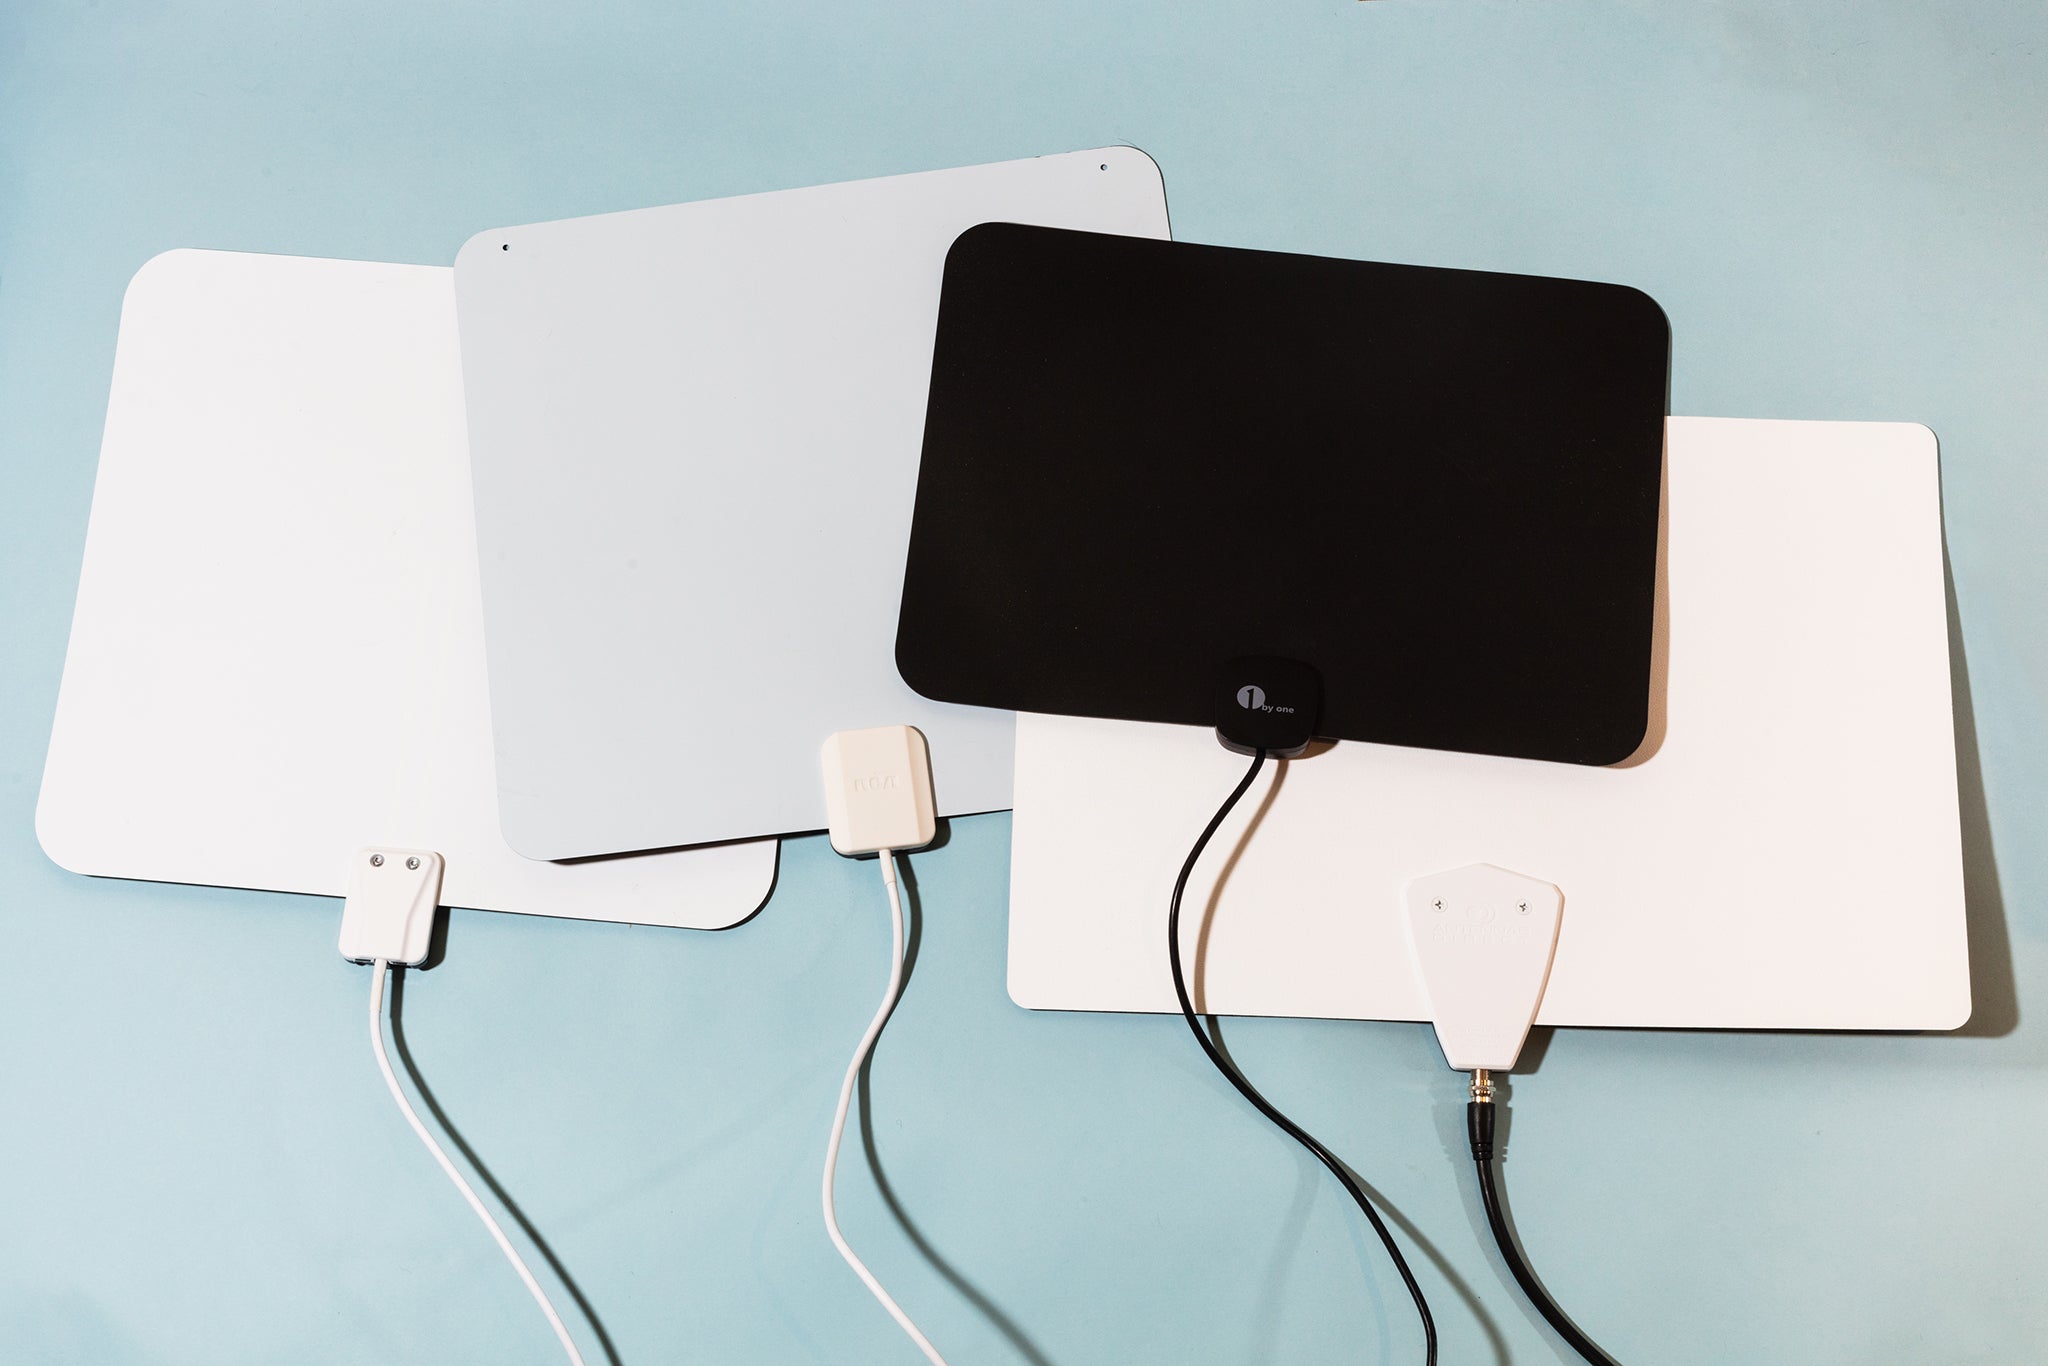 4 Reasons to Buy a TV Antenna